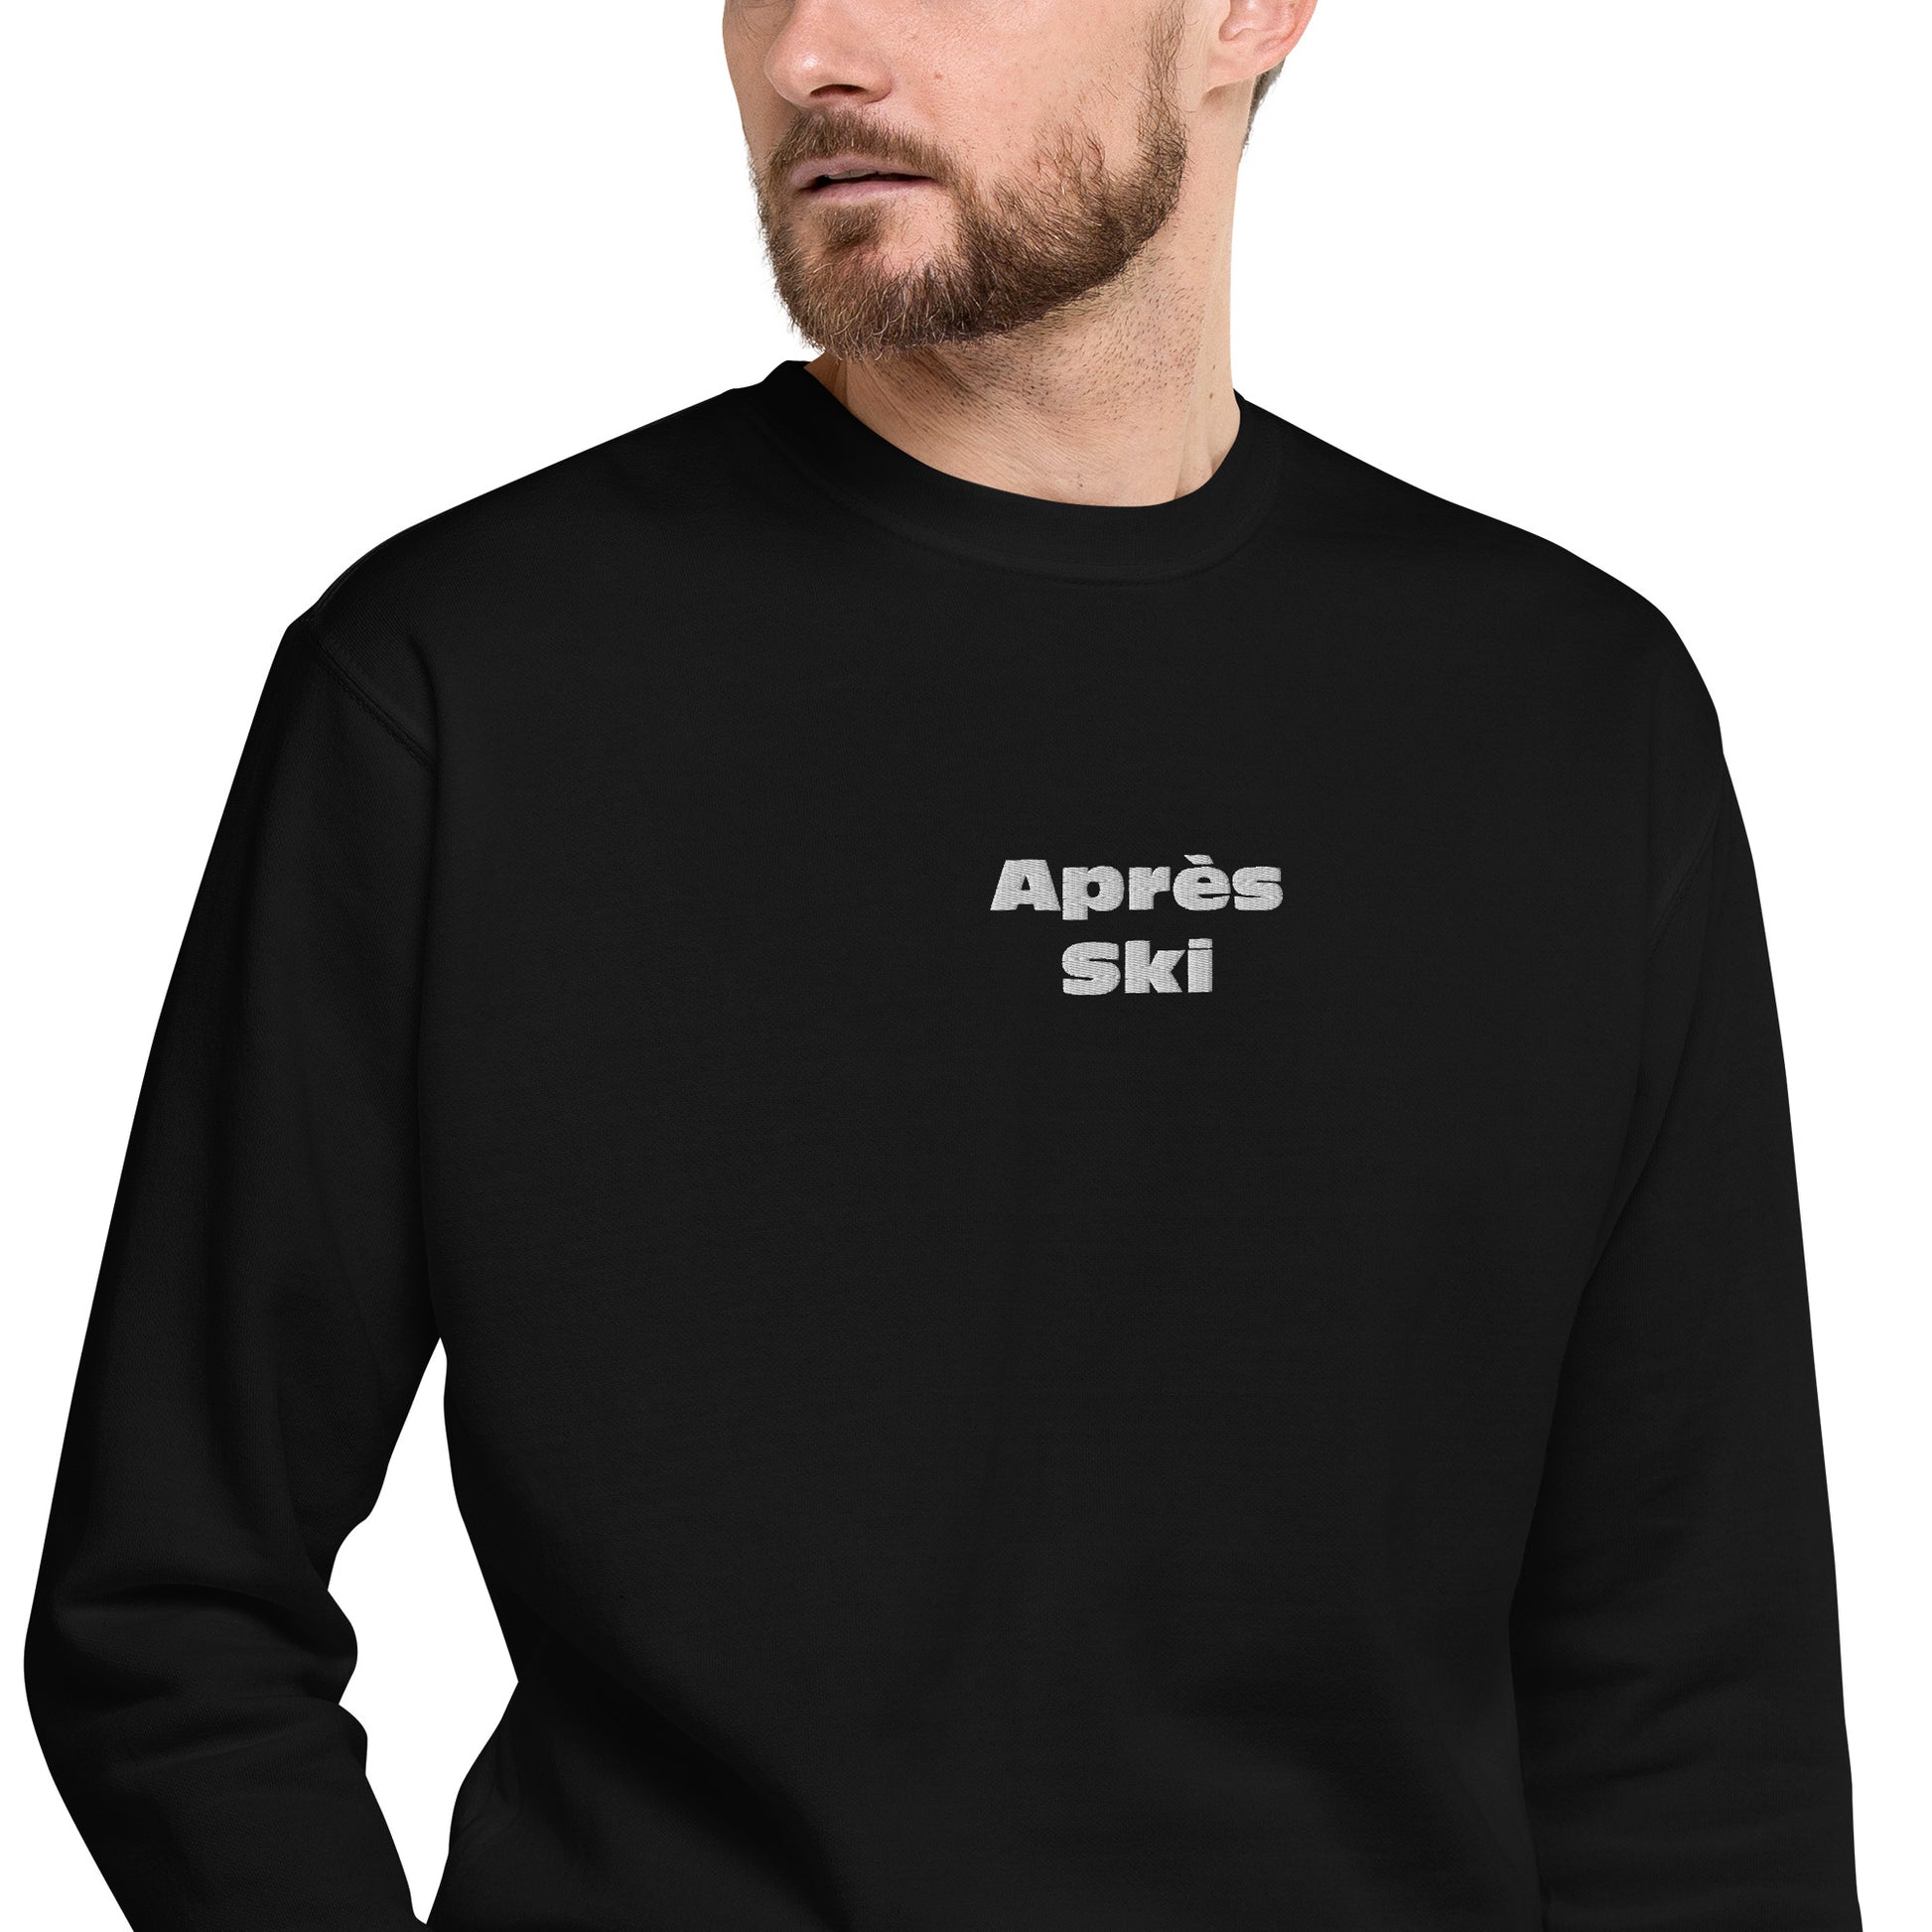 Apres Ski Embroidered Sweatshirt, Vintage Retro Sweater Embroidery Men Women Weekend Pullover Clothing Top Club Starcove Fashion